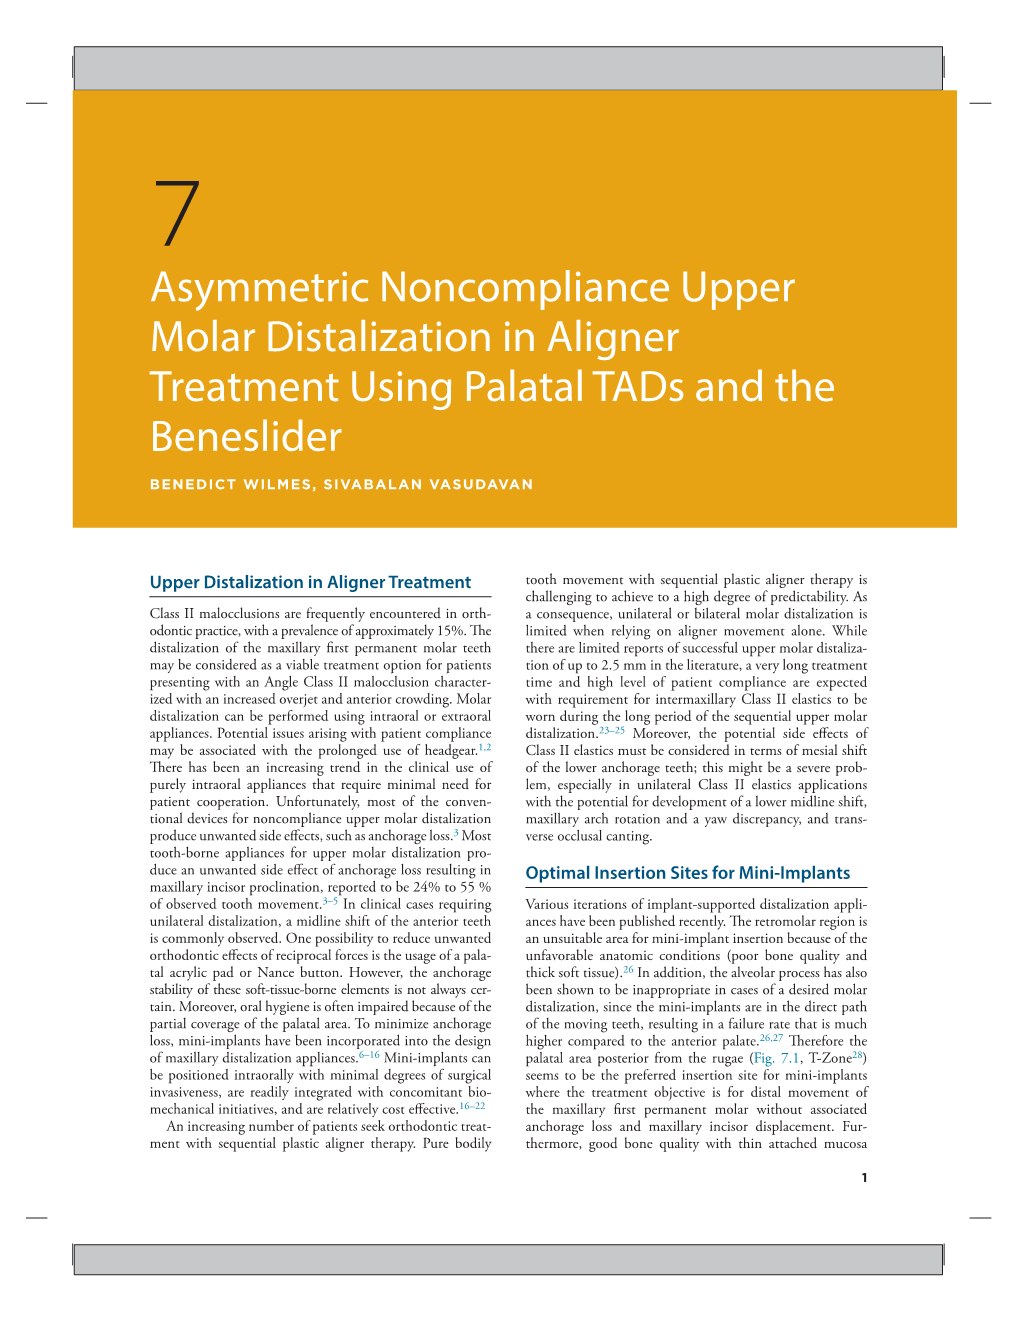 7 Asymmetric Noncompliance Upper Molar Distalization in Aligner Treatment Using Palatal Tads and the Beneslider